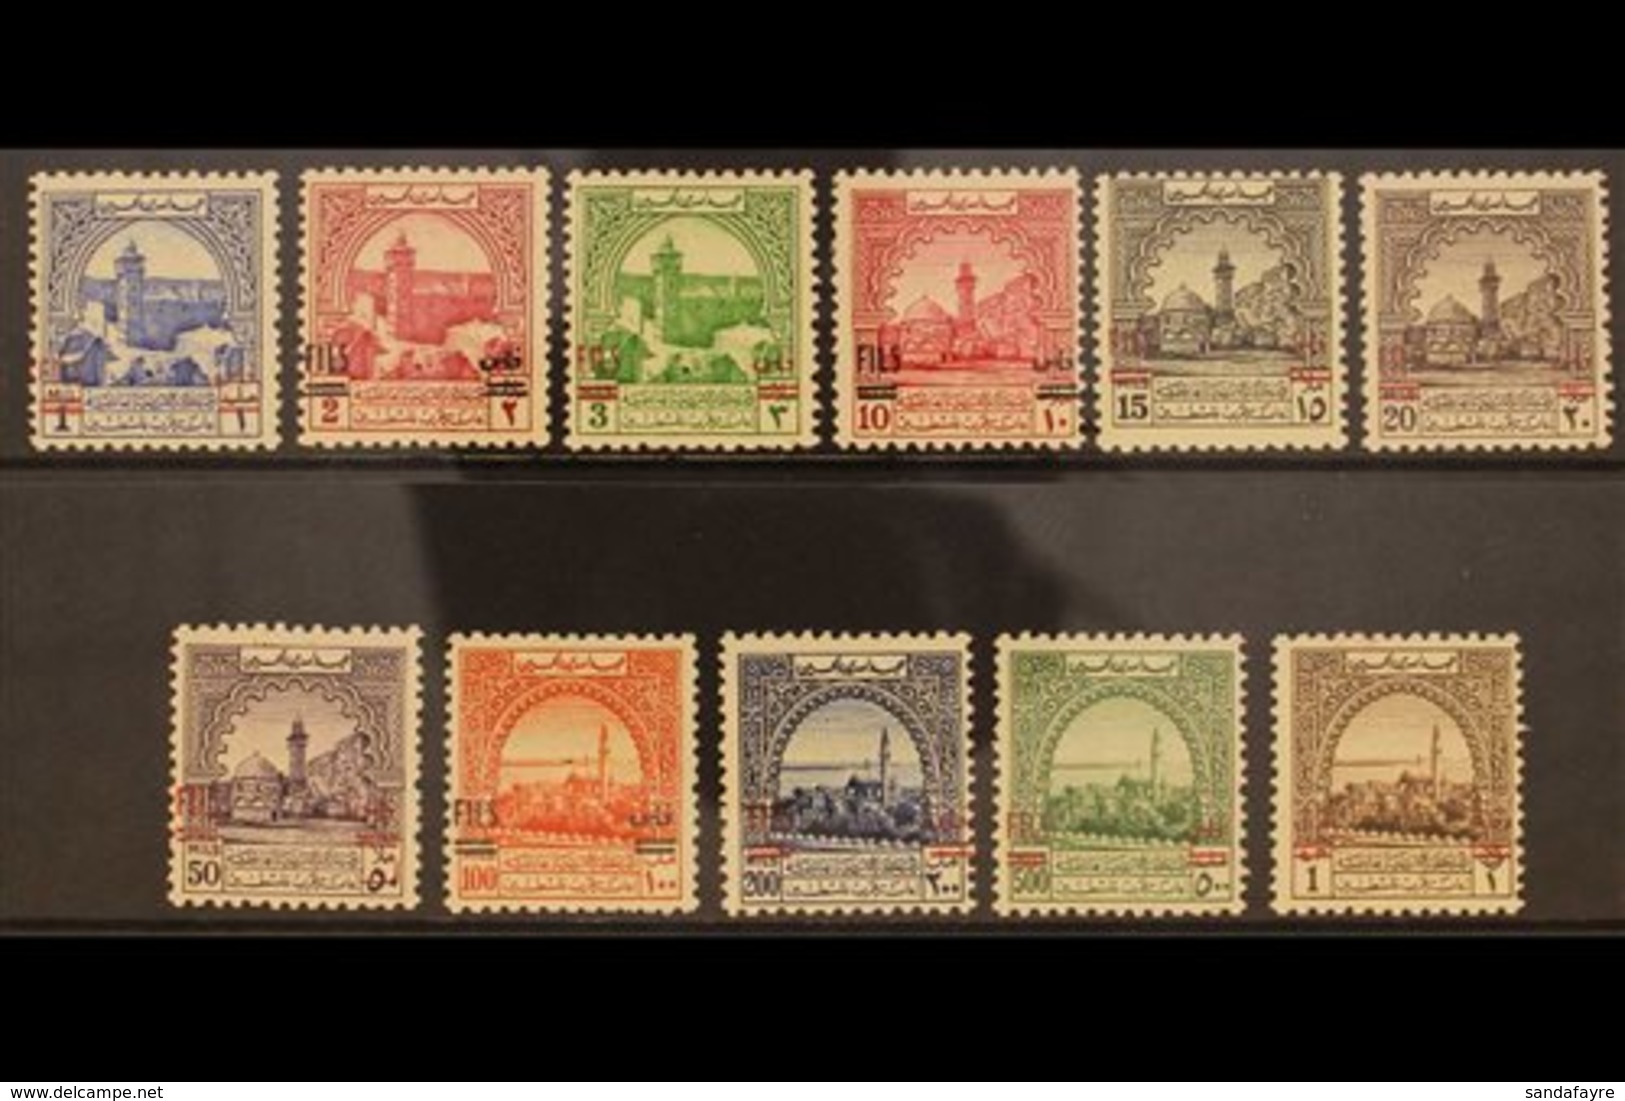 OBLIGATORY TAX 1952 Overprinted Complete Set, SG T334/44, Very Fine Mint Seldom Seen Set (11 Stamps) For More Images, Pl - Giordania